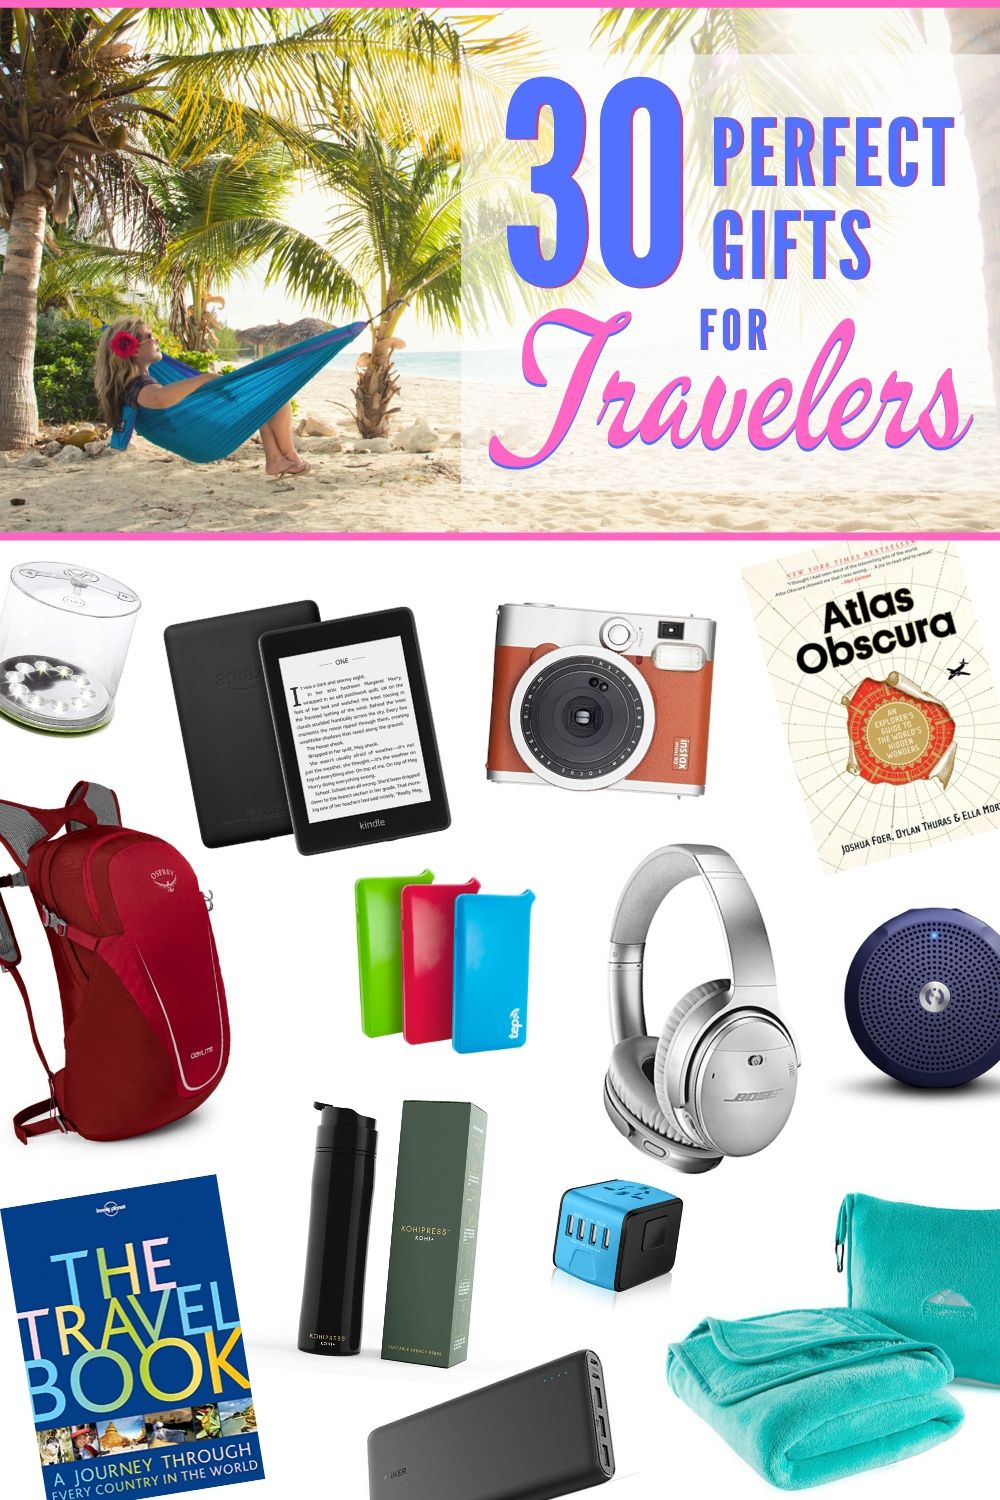 Travel-themed gifts for adventure seekers